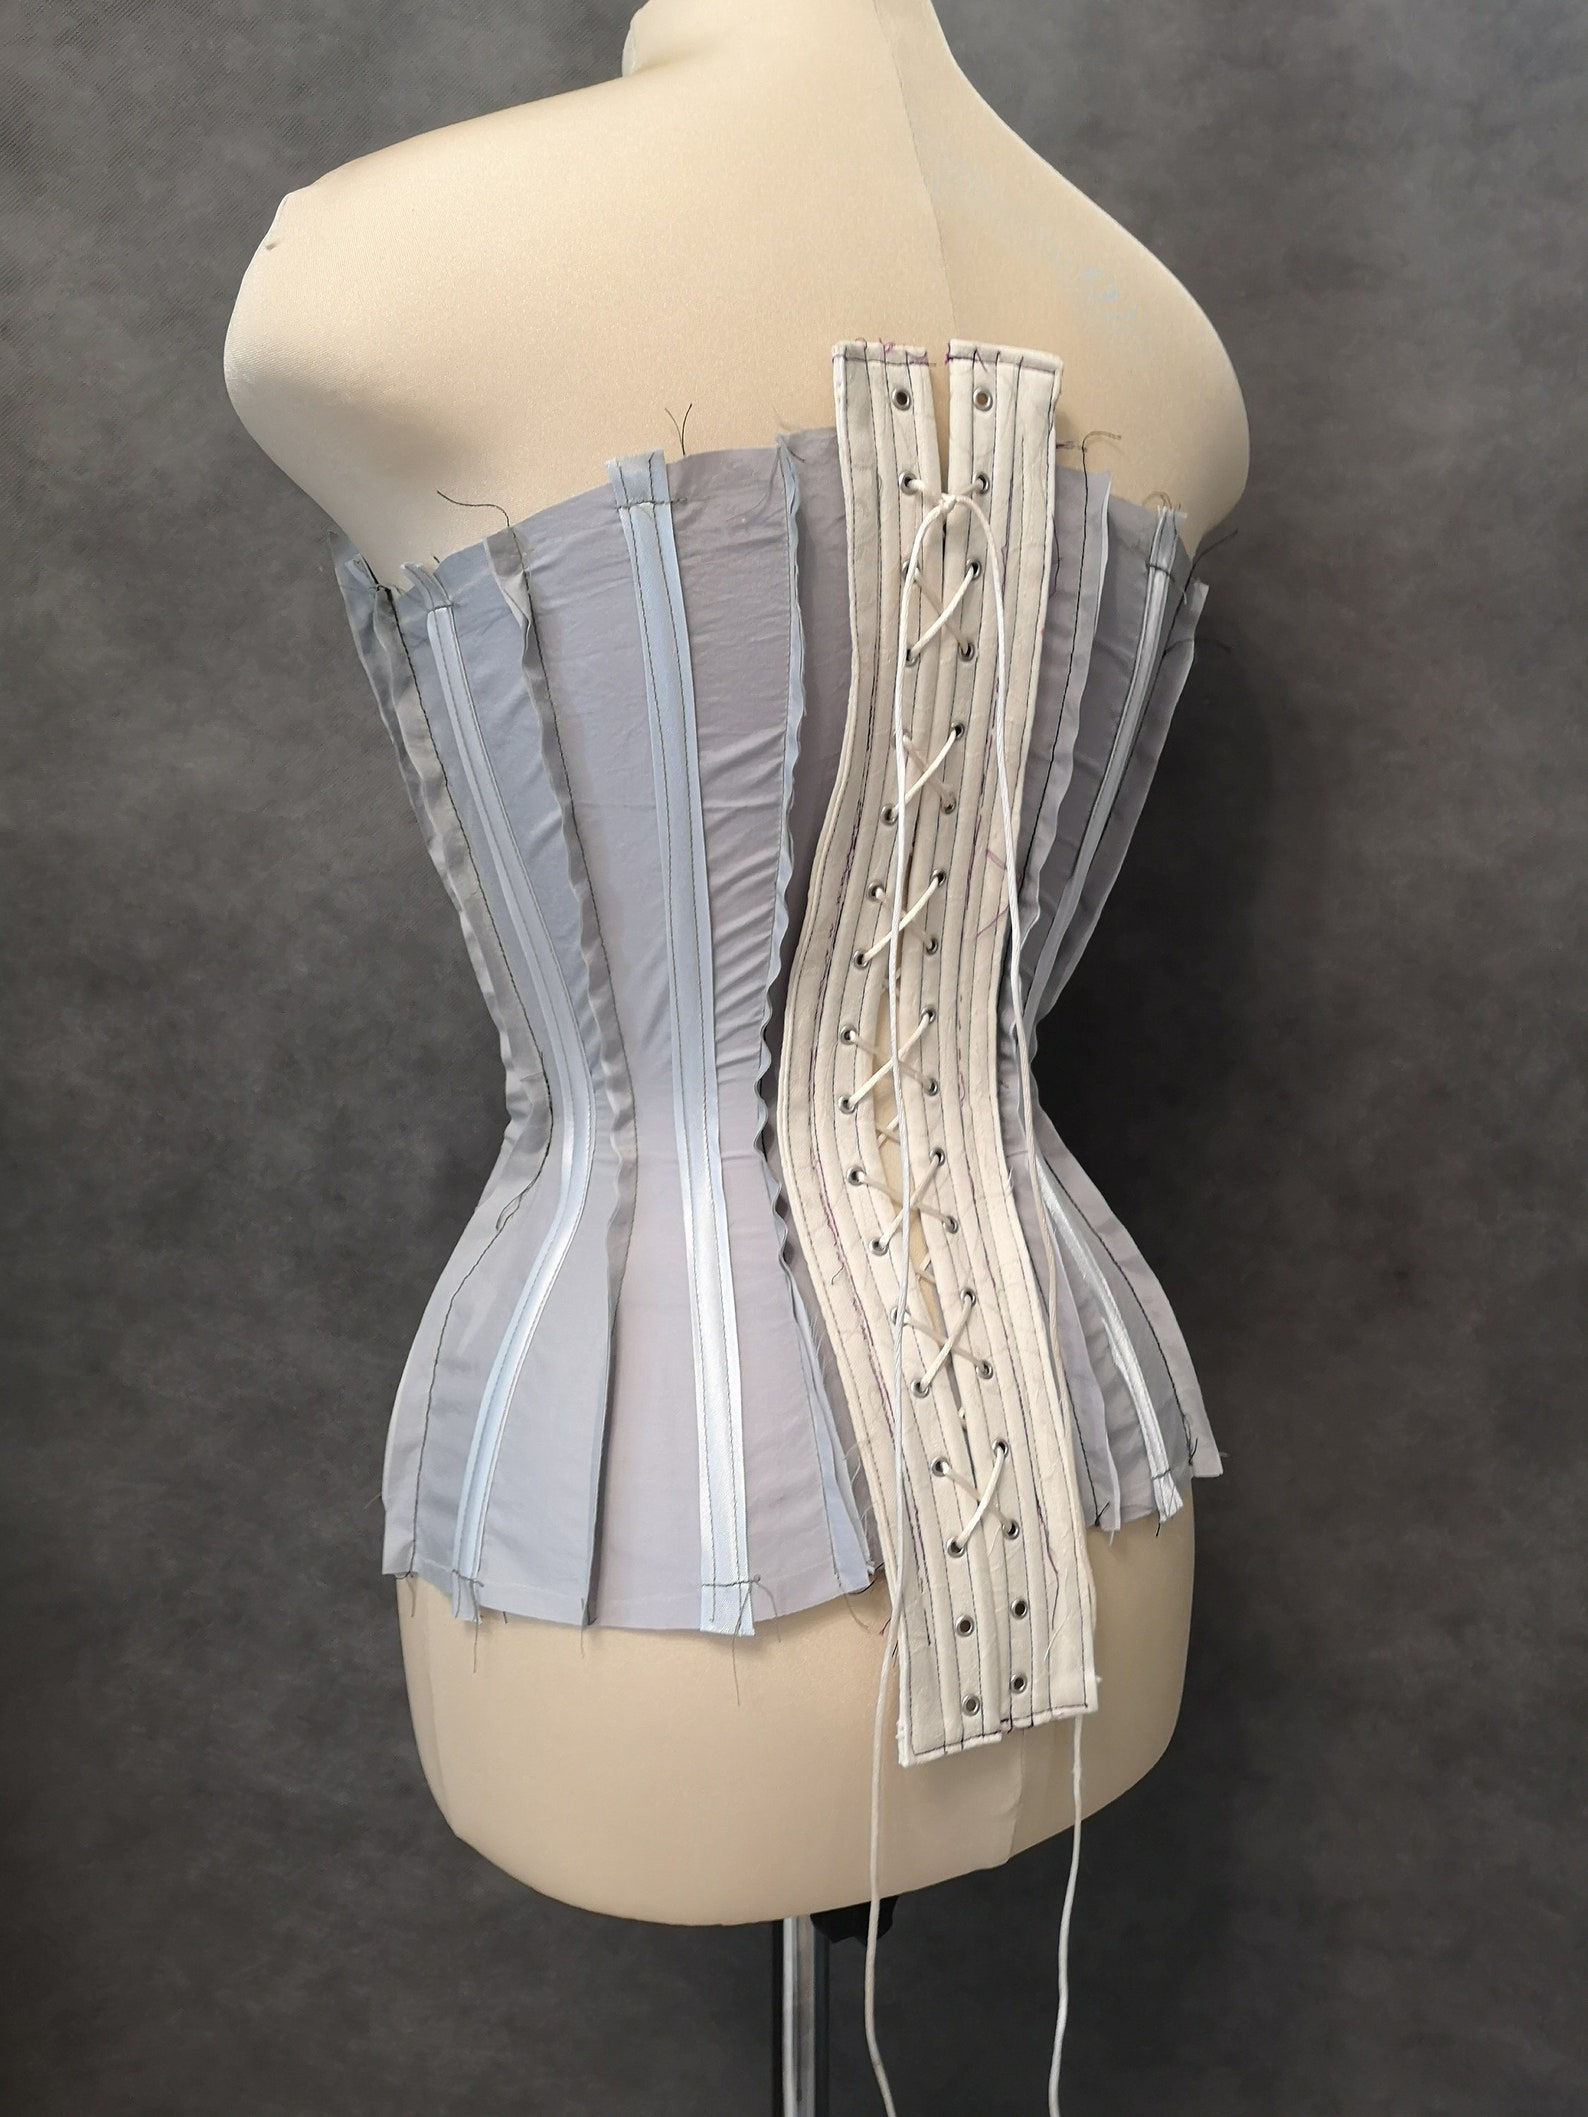 Mock-up for corset or stays | Etsy